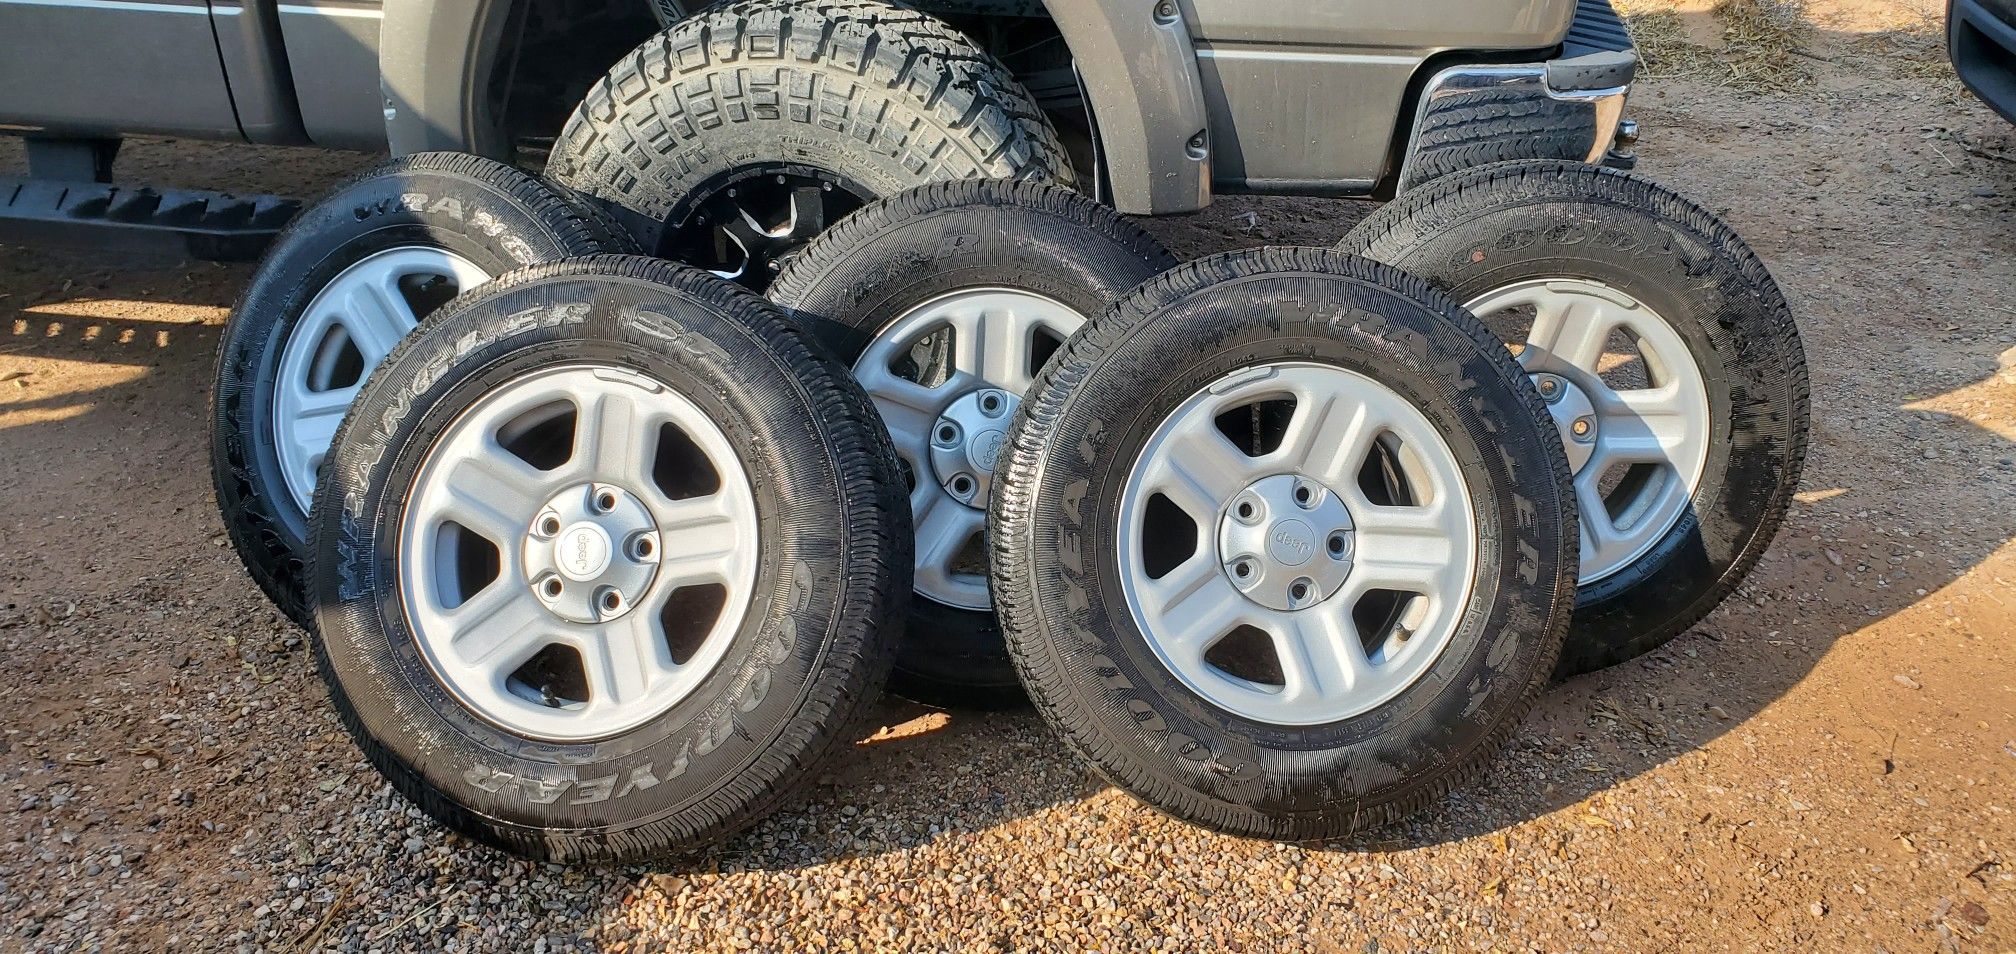 5 Jeep Wheels and tires $250.00